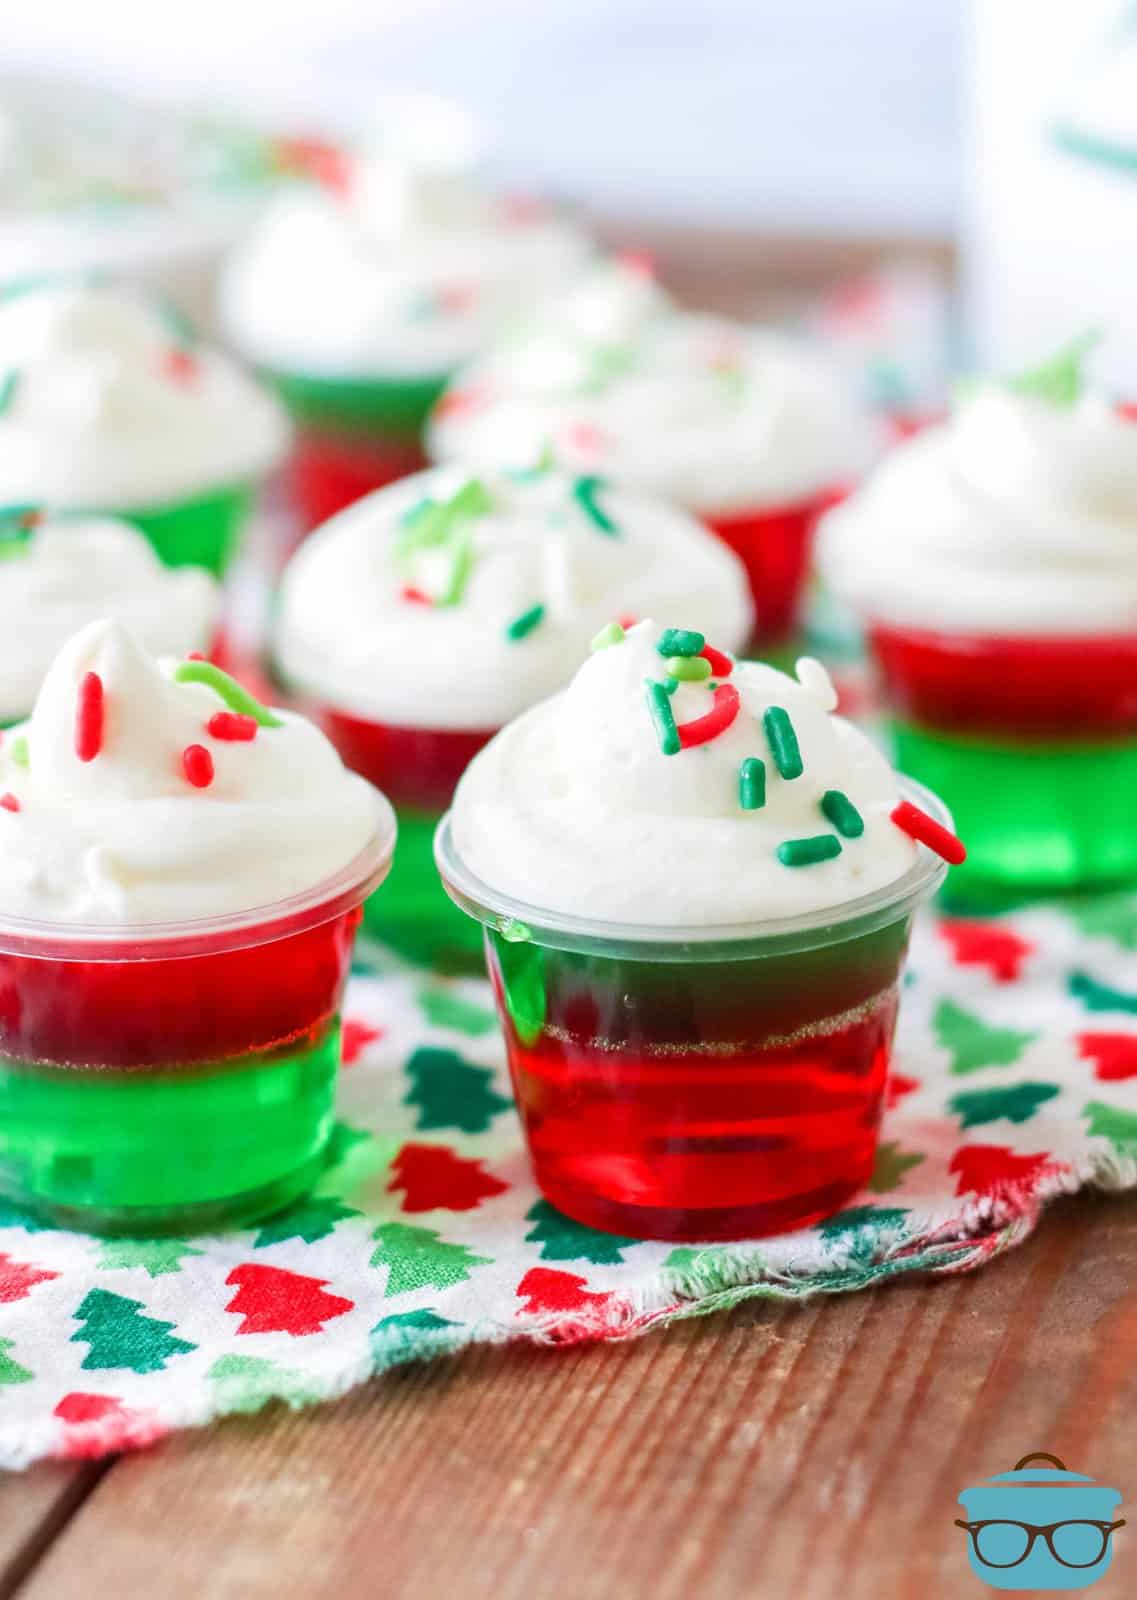 Holiday Jell-O shots on Christmas linen topped with whipped topping and sprinkles.